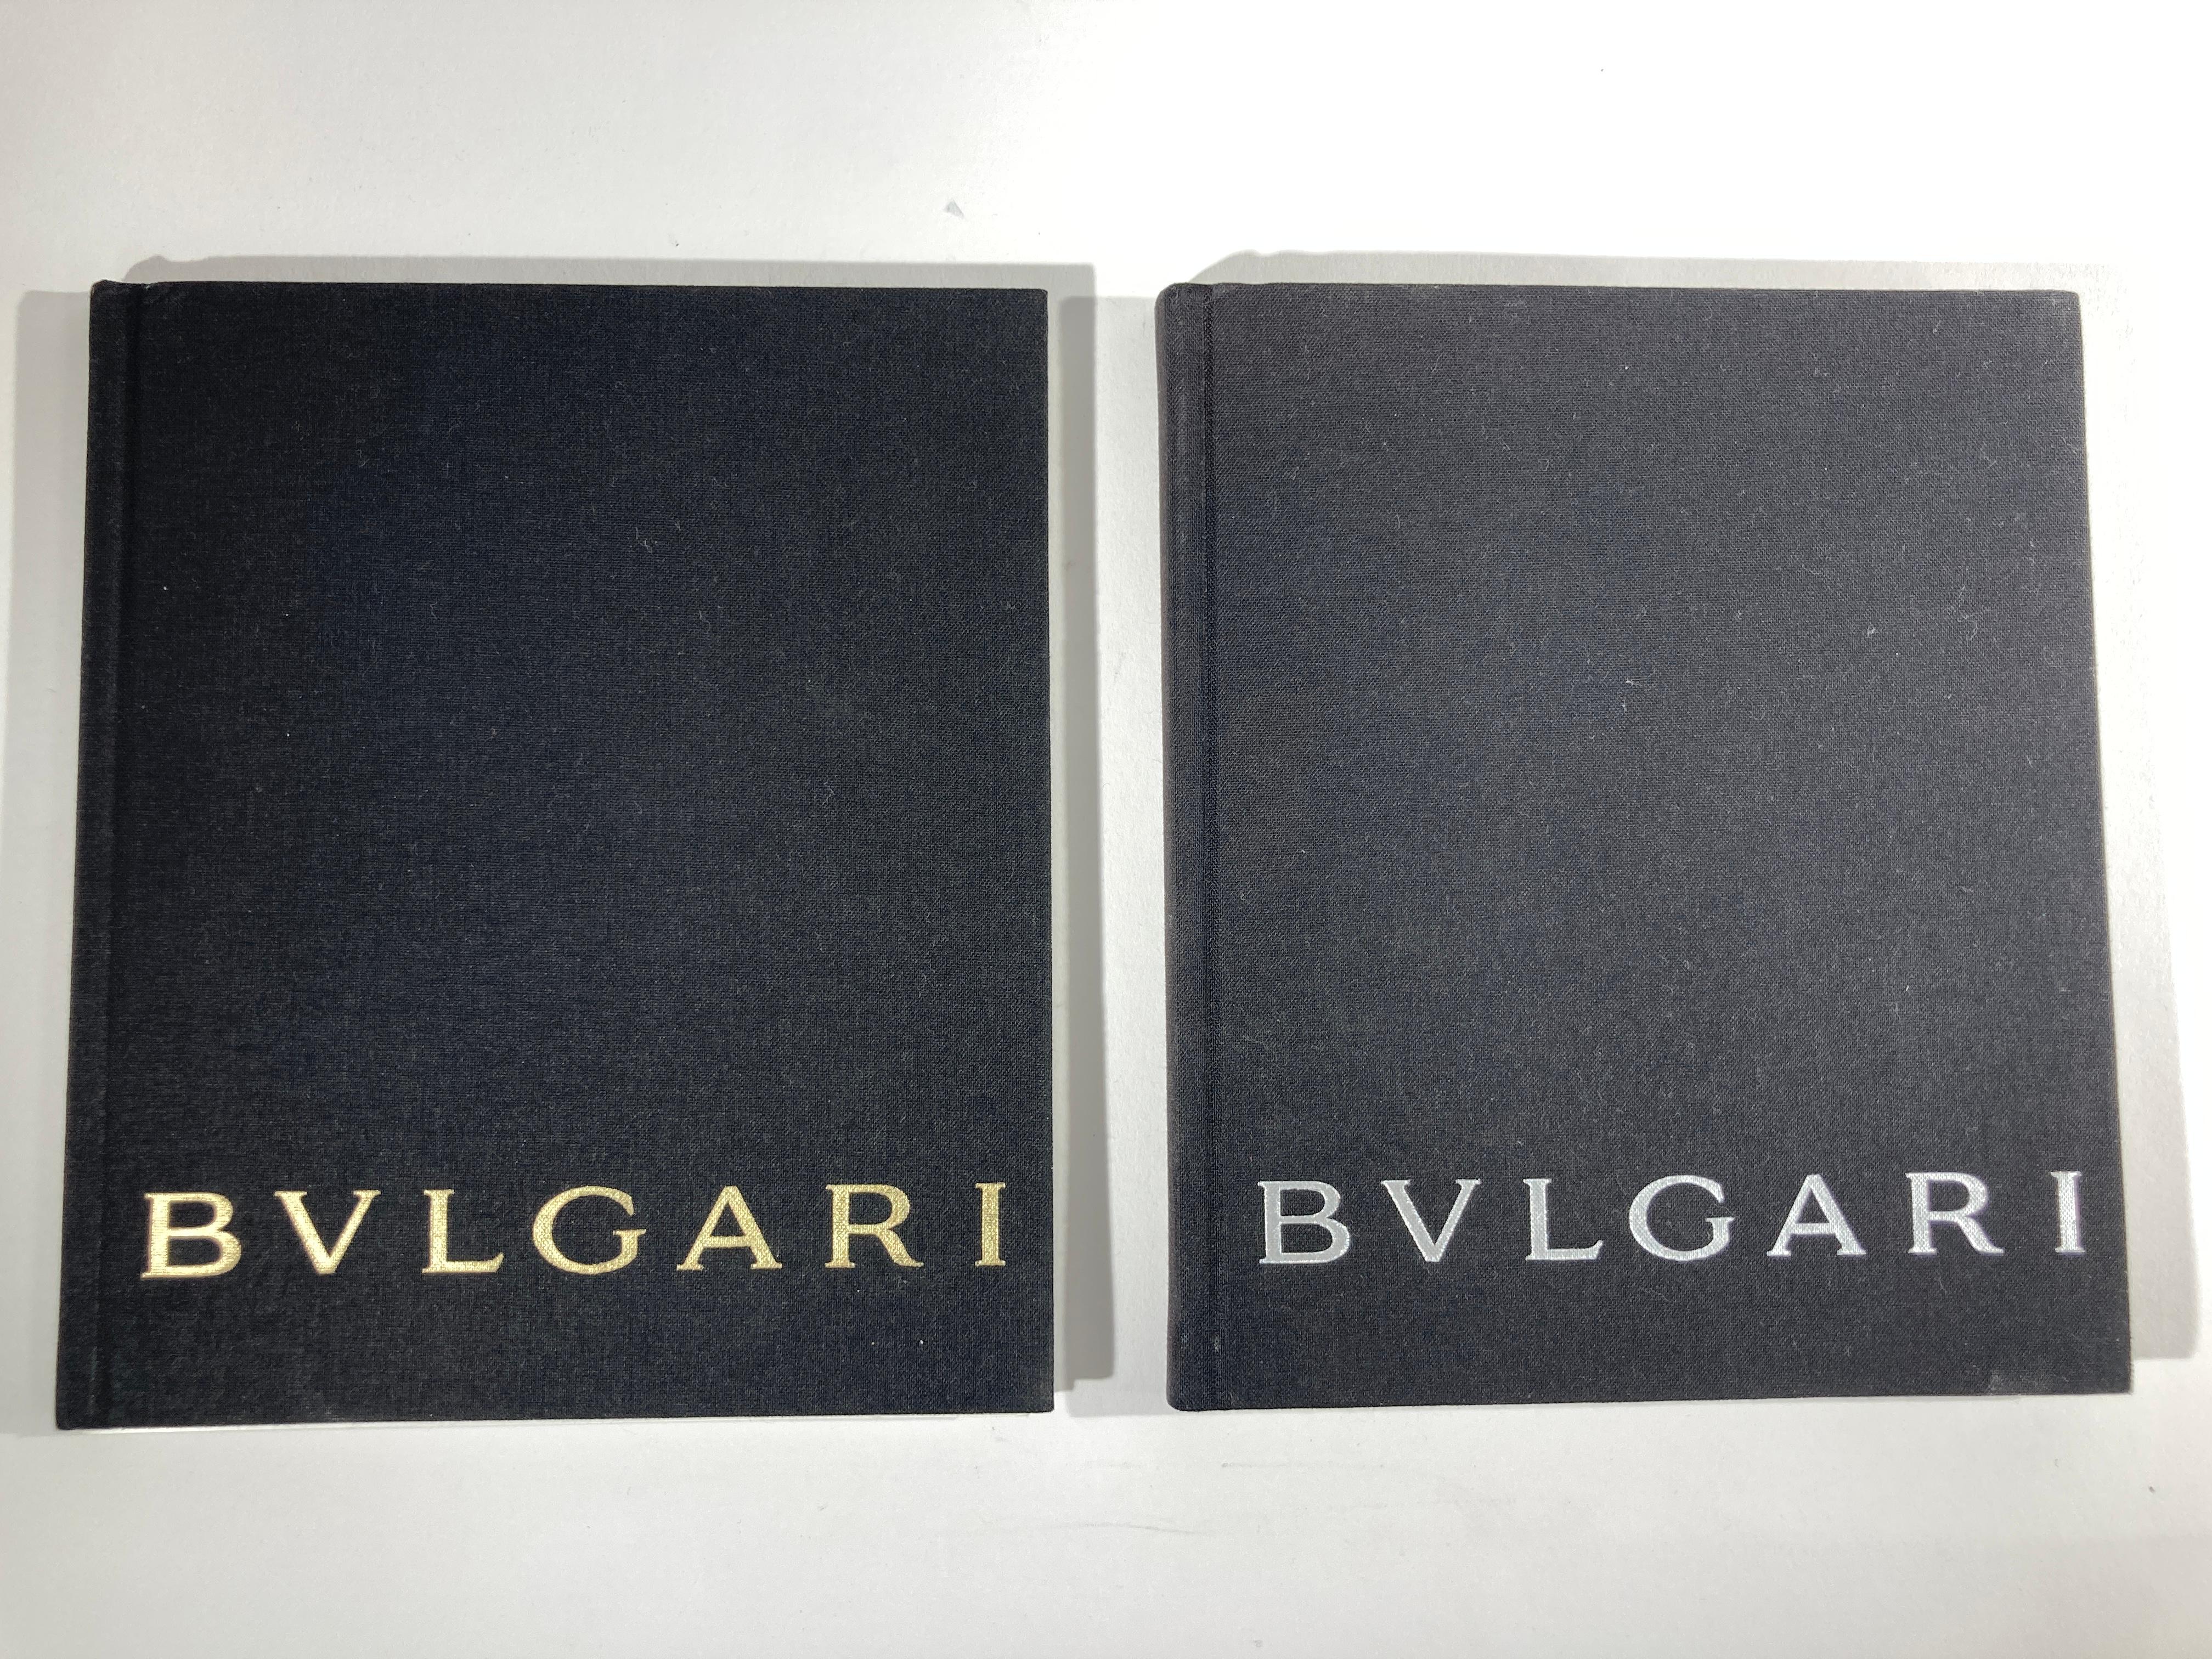 Set of two Bulgari catalogues, jewelry and watches.
Collection of 2013.
Hardcover black cloth catalogues of one of the most famous Luxury Jewellery maker in the world.
Sotirio Bulgari, young Greek goldsmith, settled in Rome in 1881. During his first